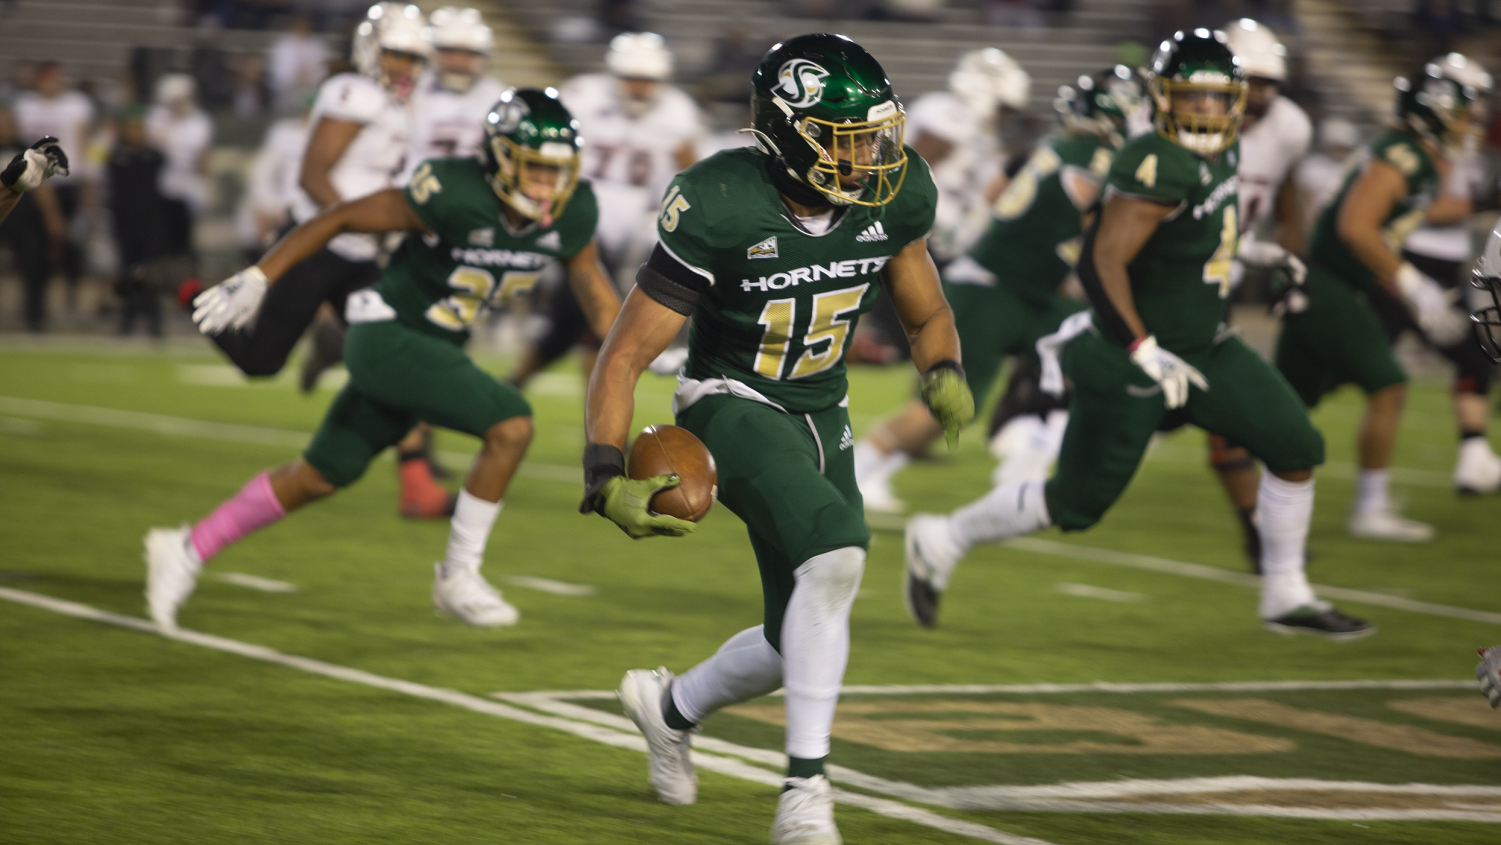 Sac State sophomore nickelback Marte Mapu (15) intercepts the ball from Southern Utah quarterback Justin Miller on Oct. 9, 2021, at Hornet Stadium. The Hornets beat the Montana Grizzlies 28-21 on Saturday Oct. 16, 2021 at Washington-Grizzly Stadium.